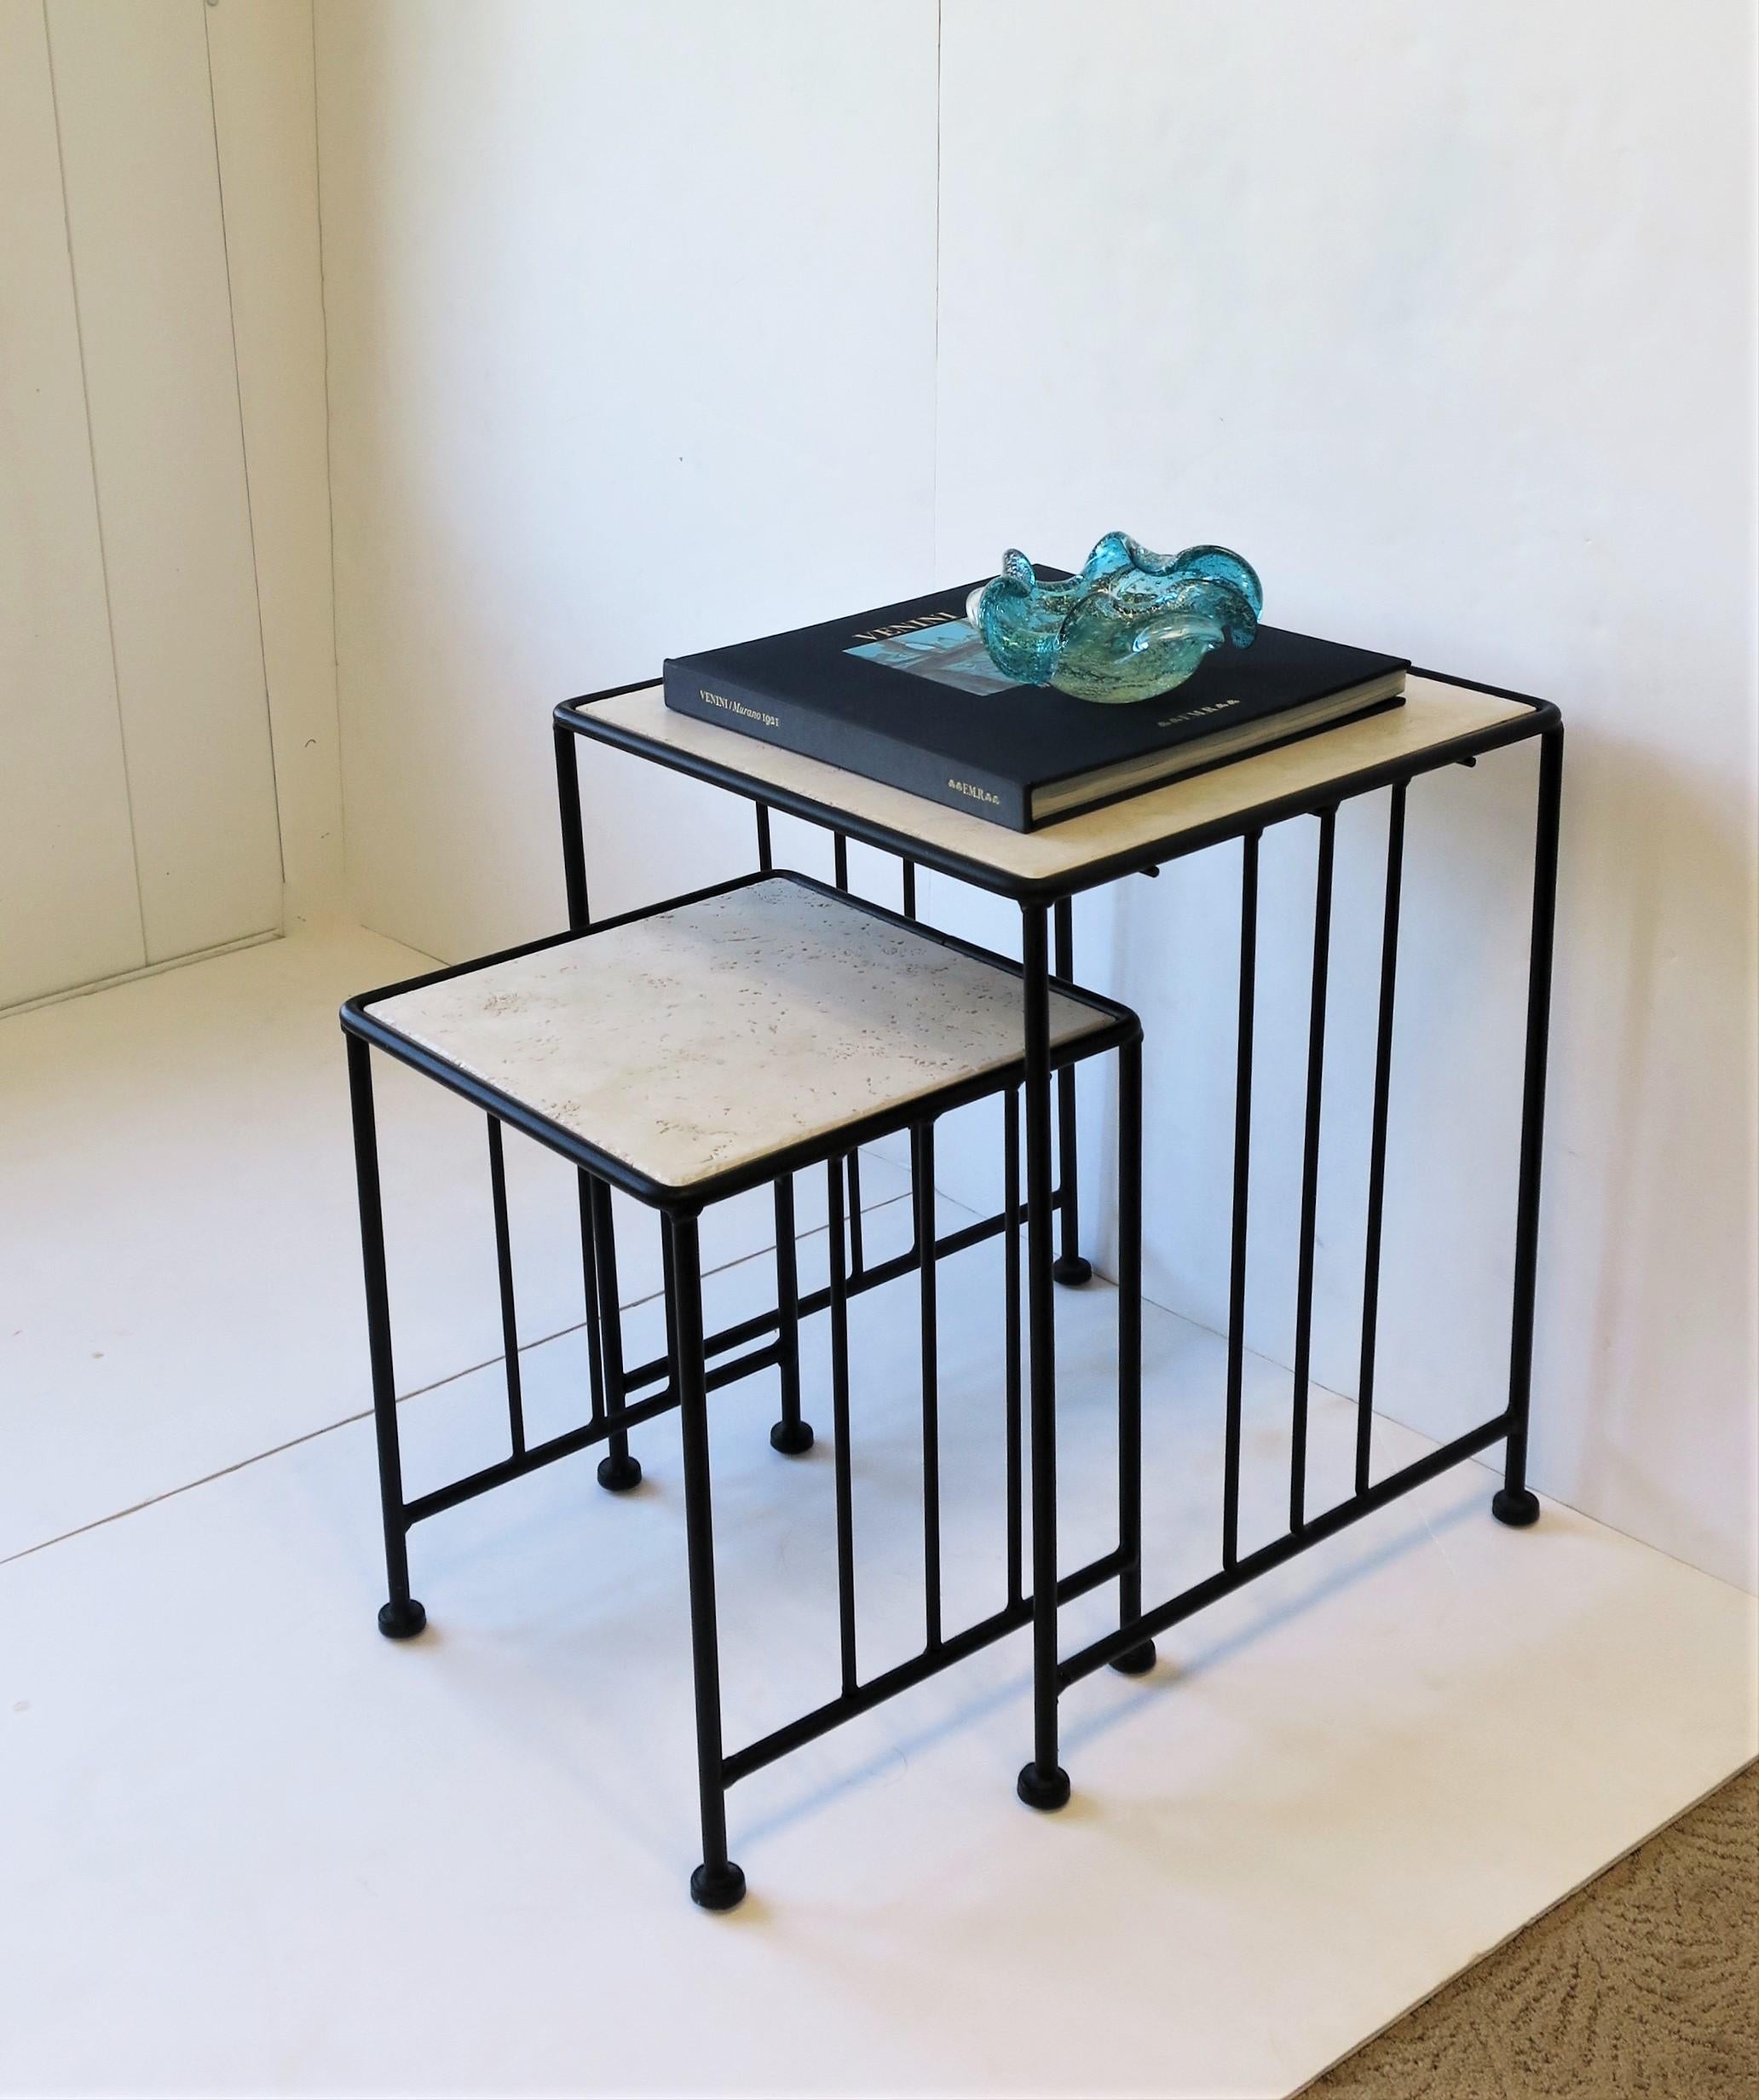 20th Century Italian Black End or Nesting Tables in the Art Deco Bauhaus Style For Sale